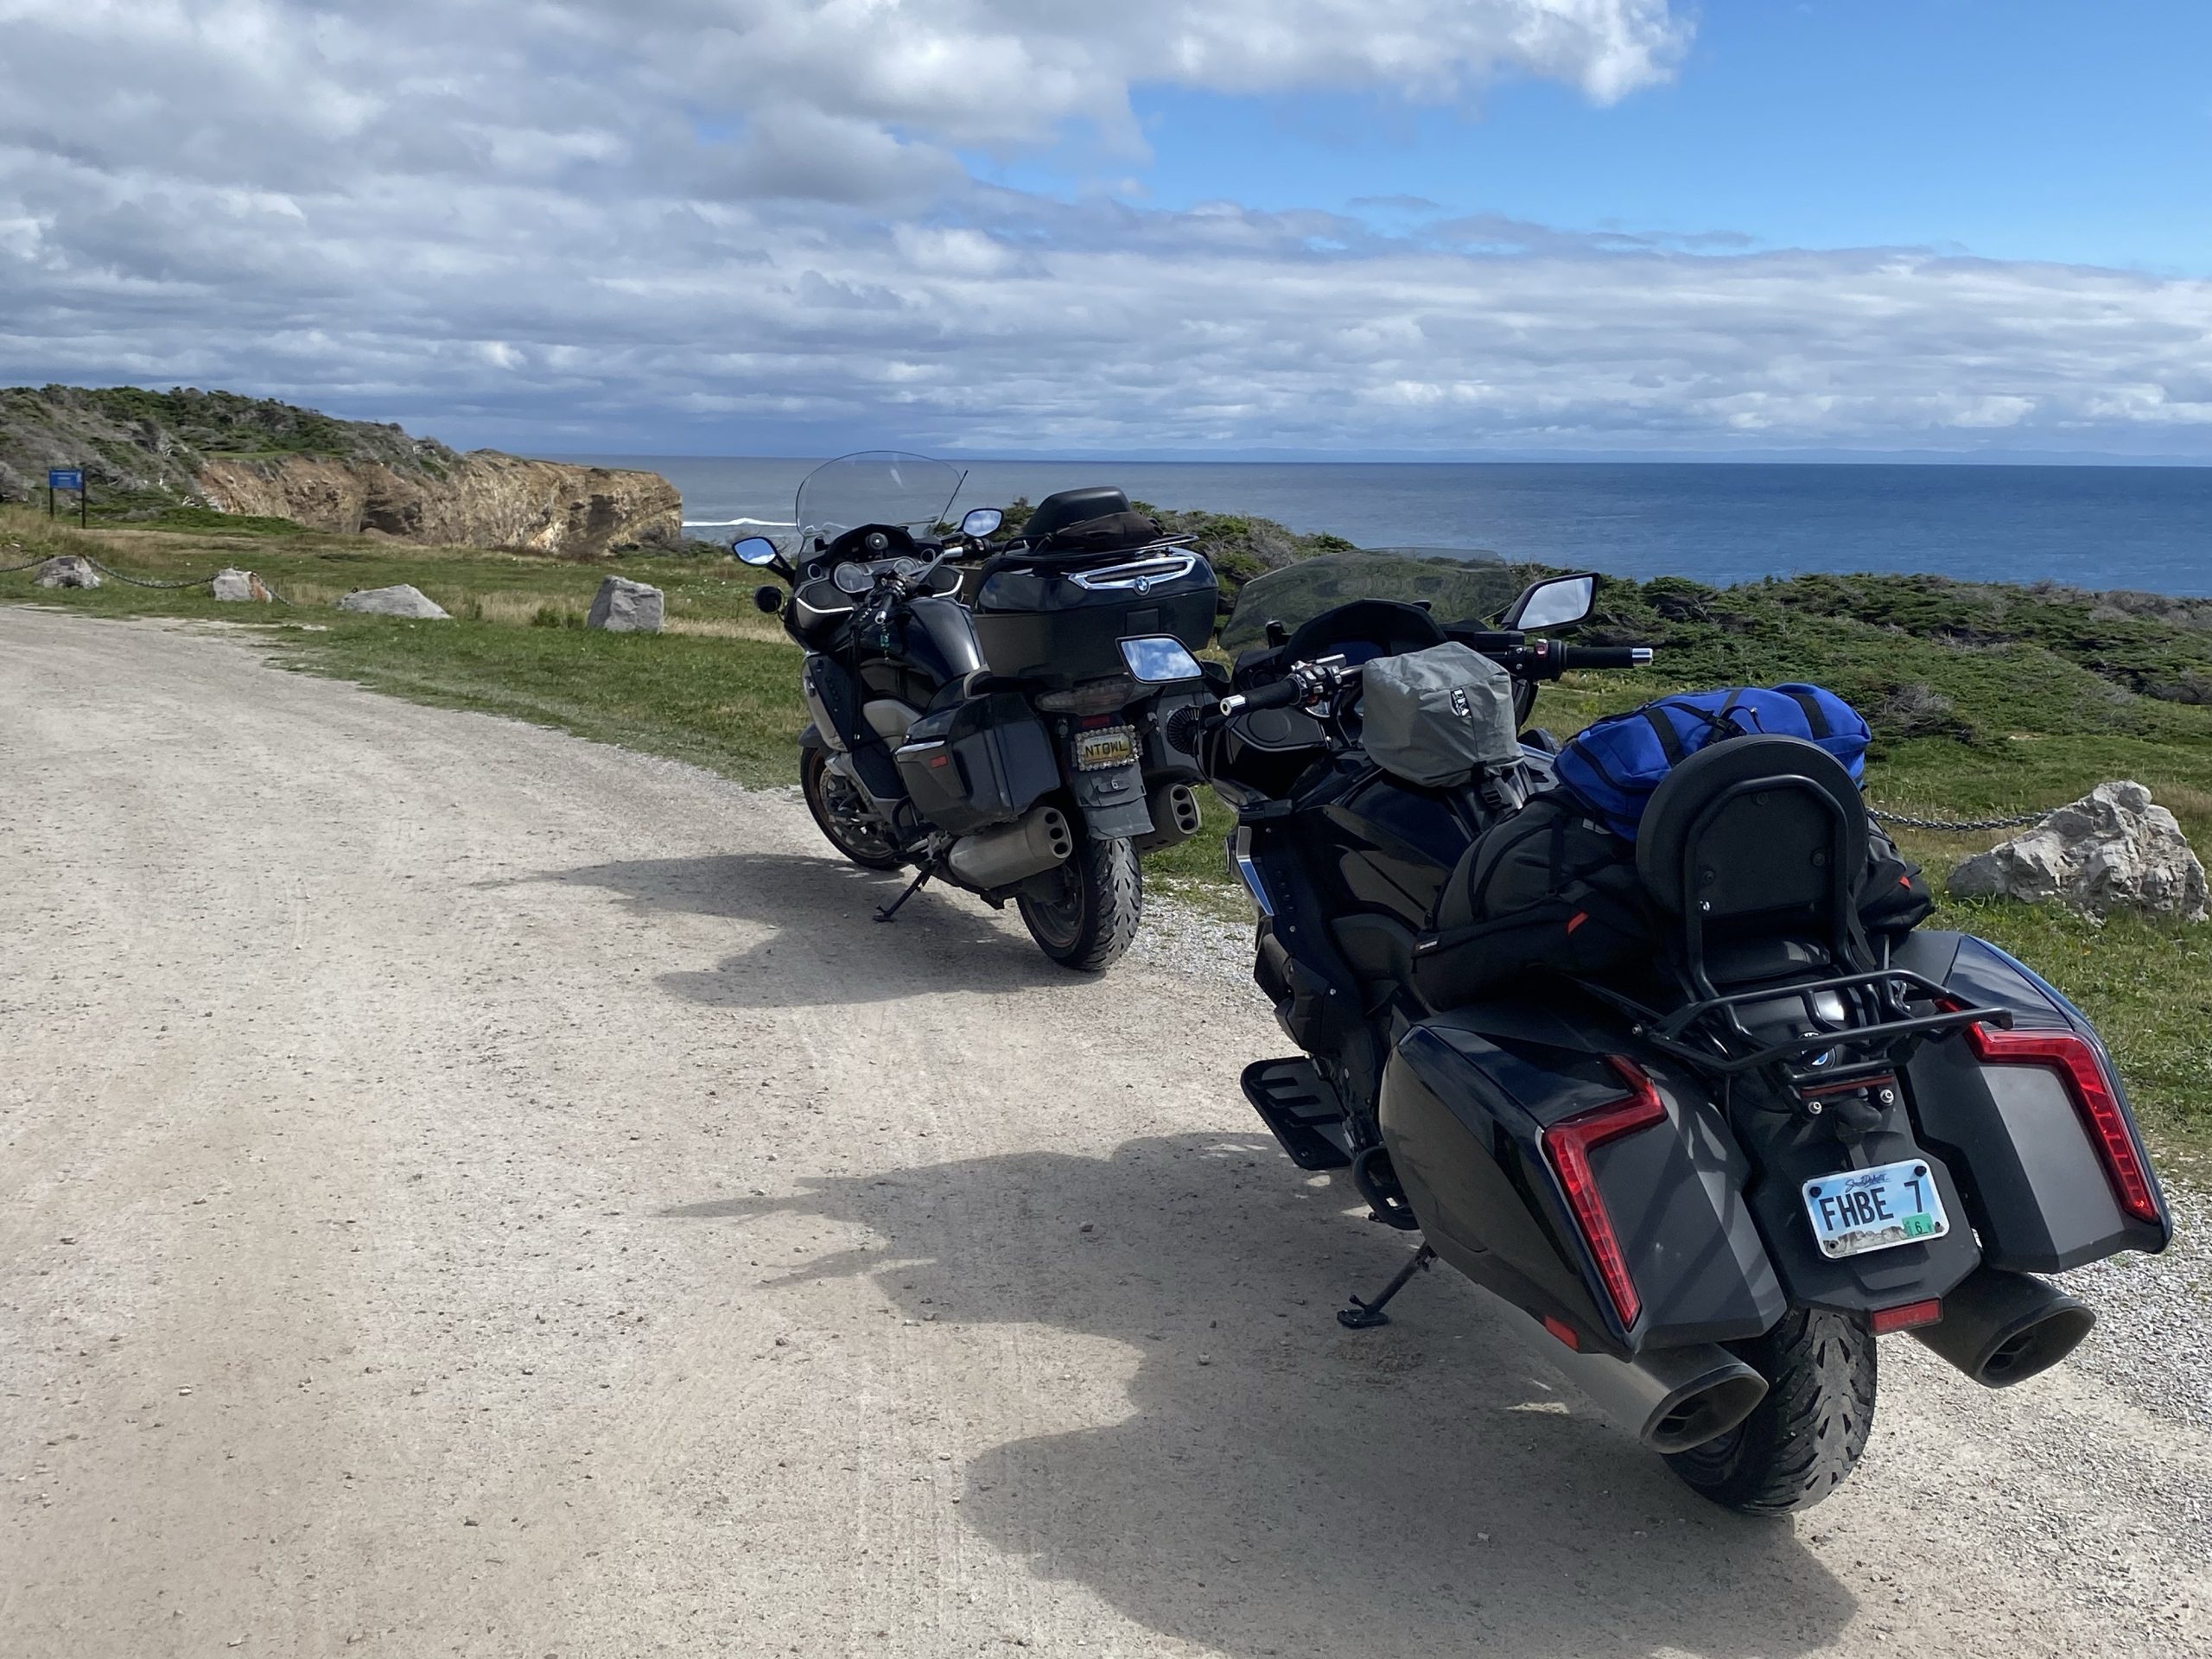 The bikes at Cape St. George at the tip of the Port au Port peninsula in Newfoundland.